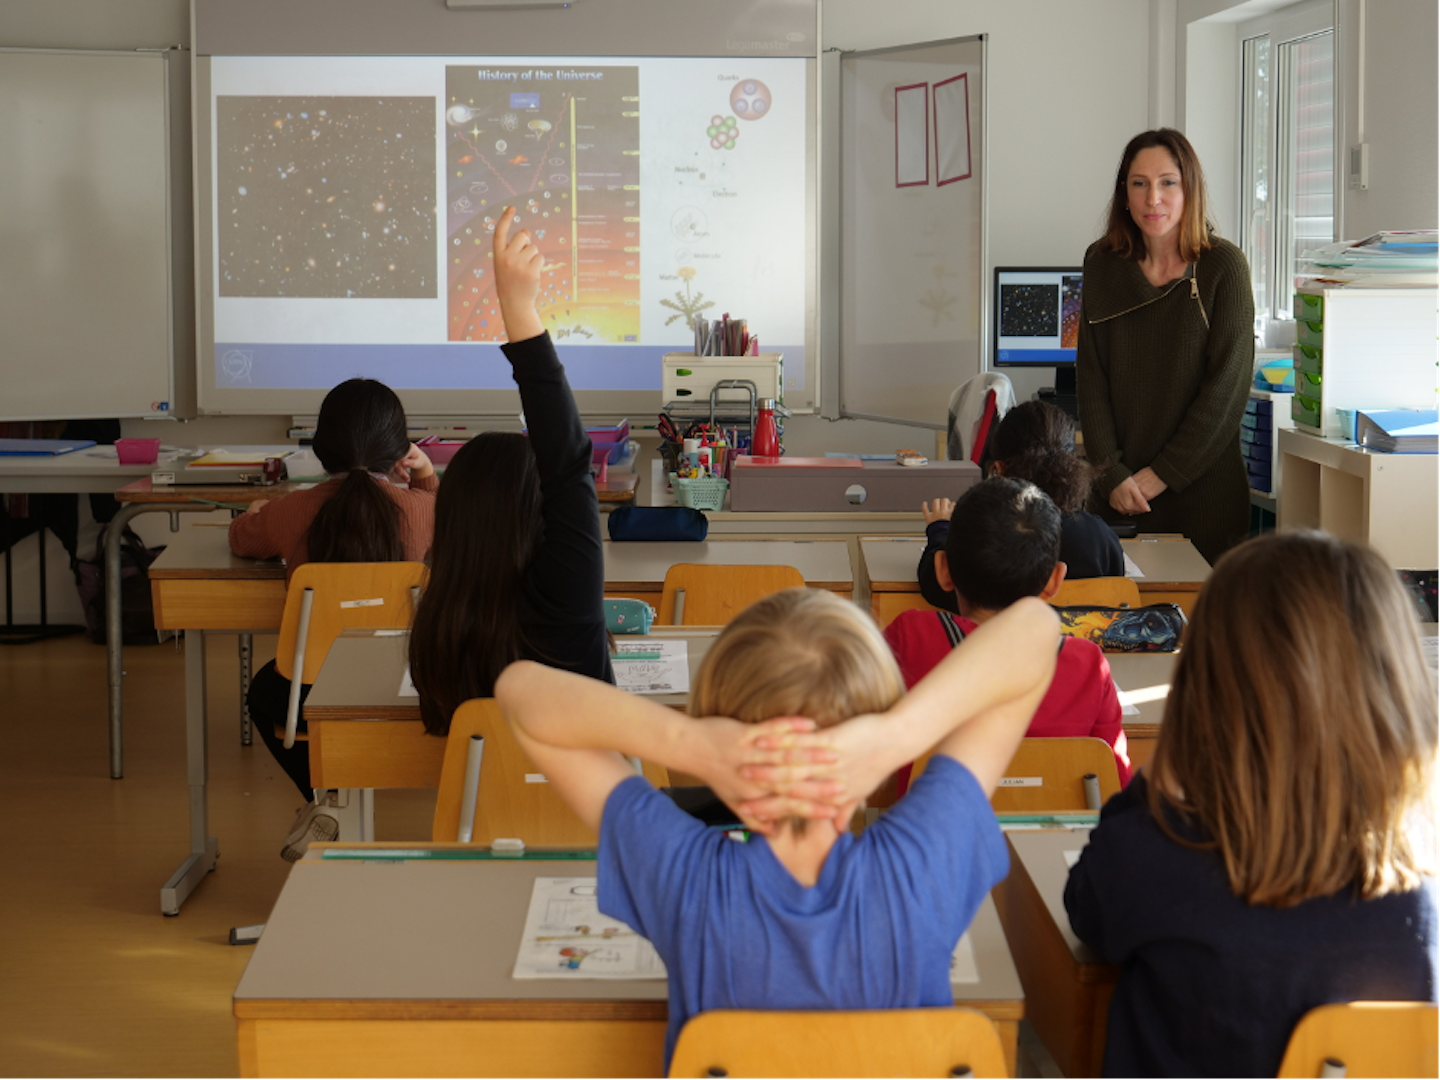 Women in a classroom. (Image: CERN) 